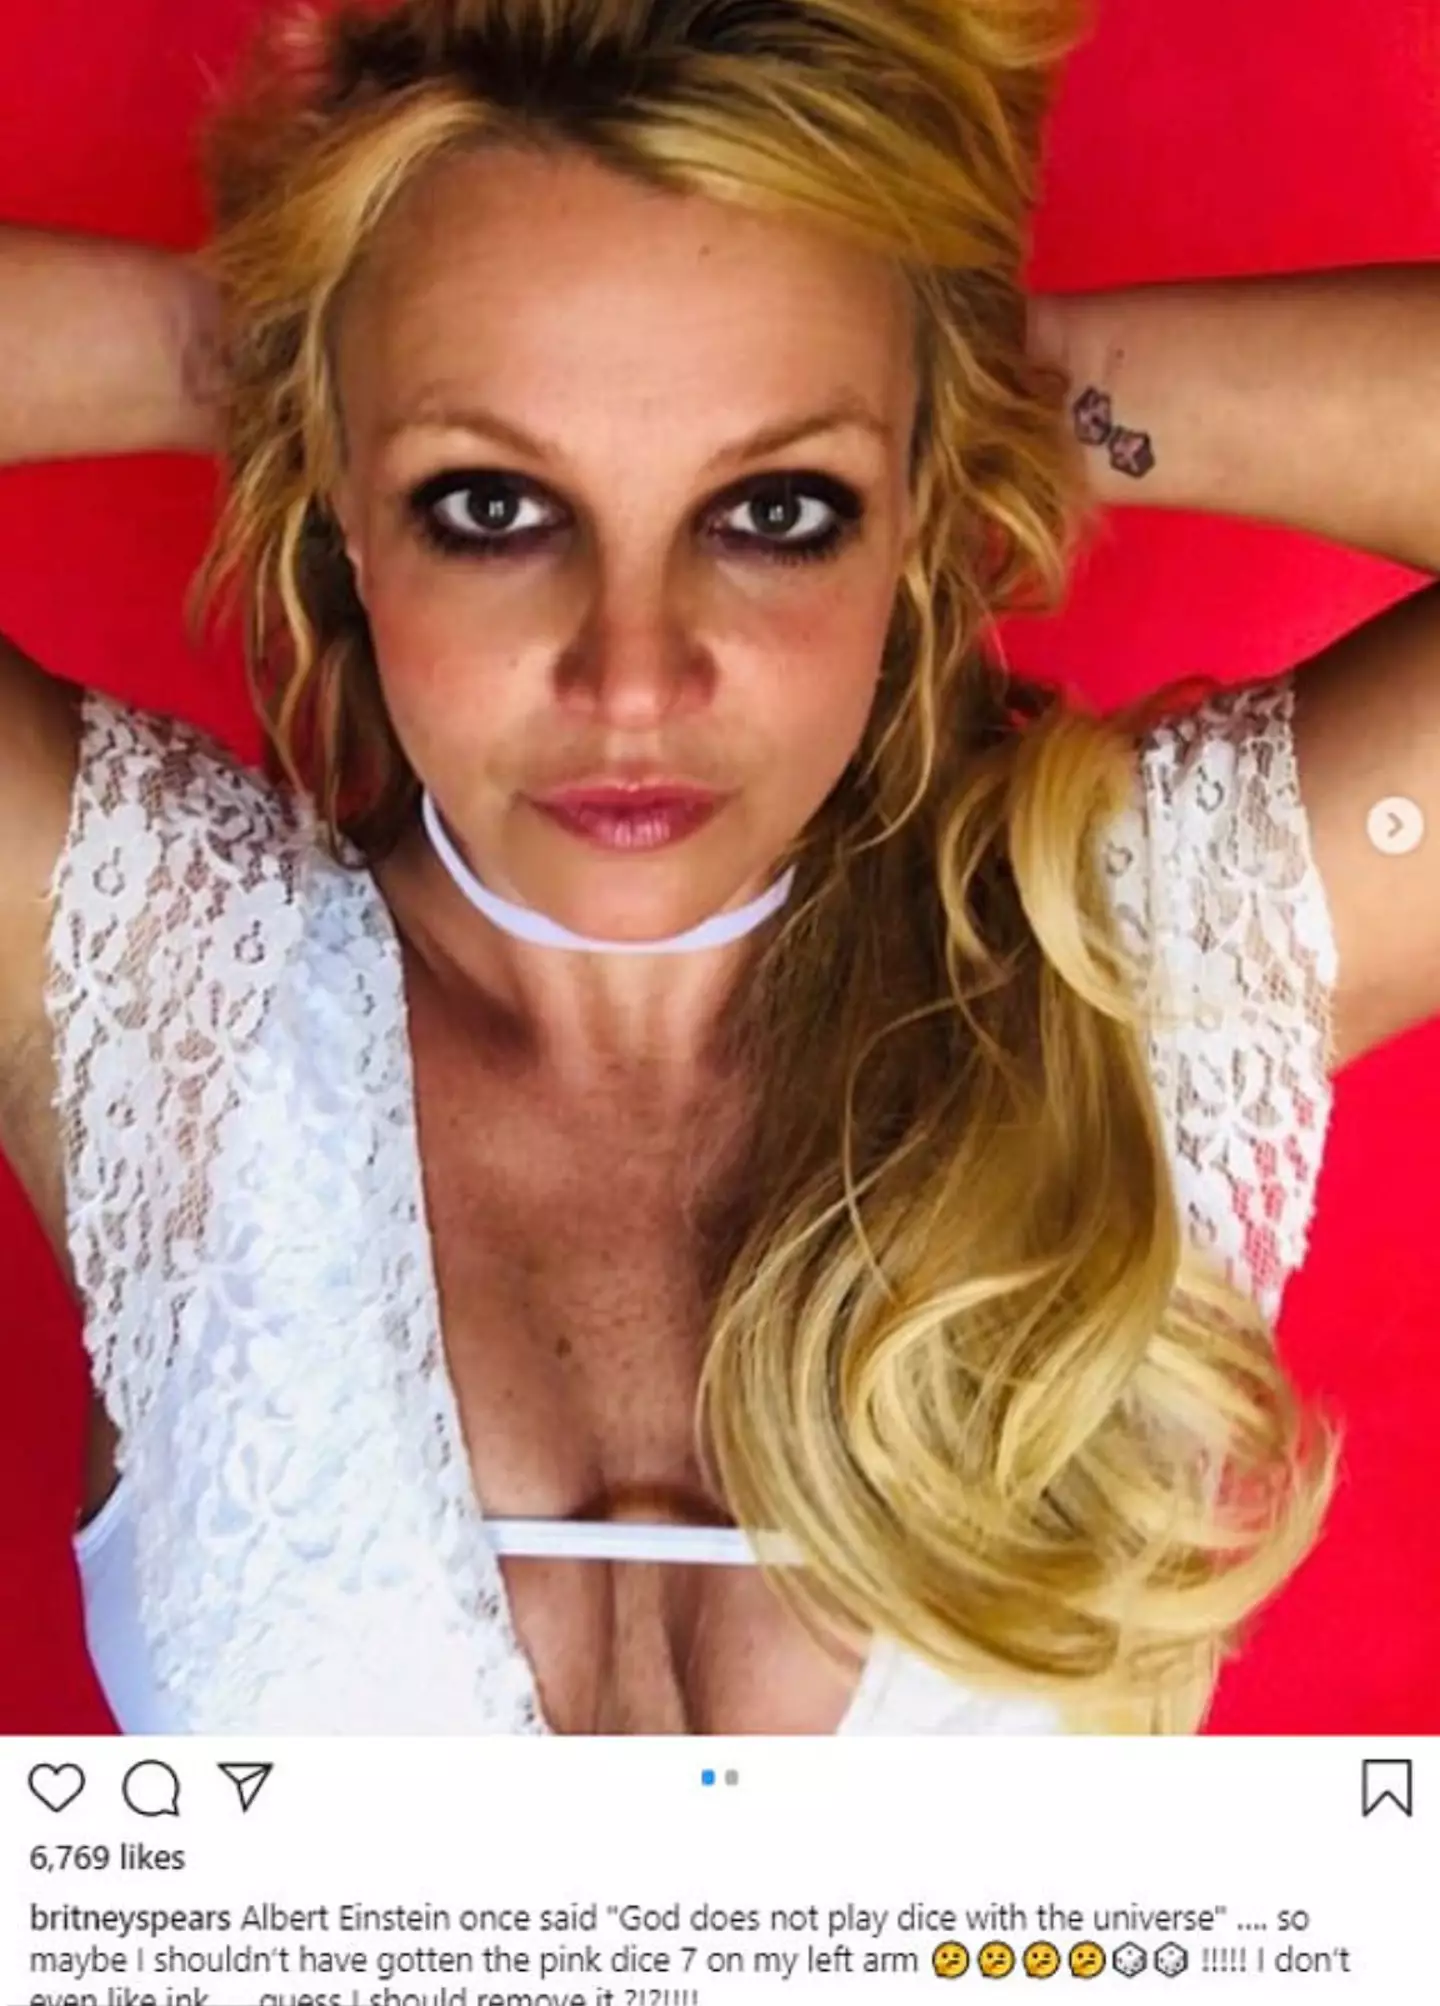 Britney pondered removing her dice tattoo three years ago.